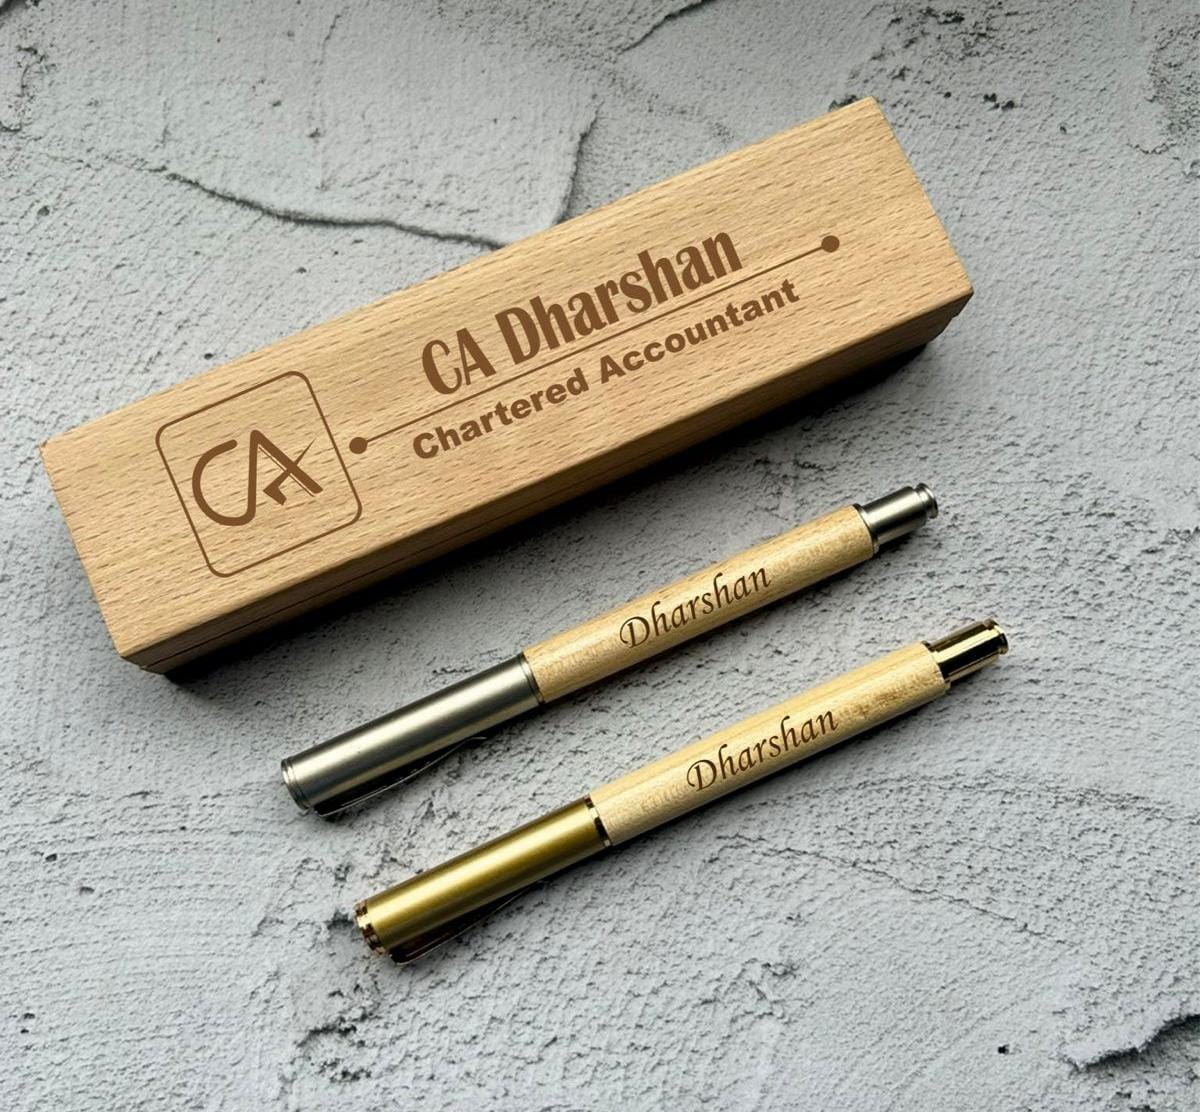 Conway Stewart Accountant's Pen - Precision Writing